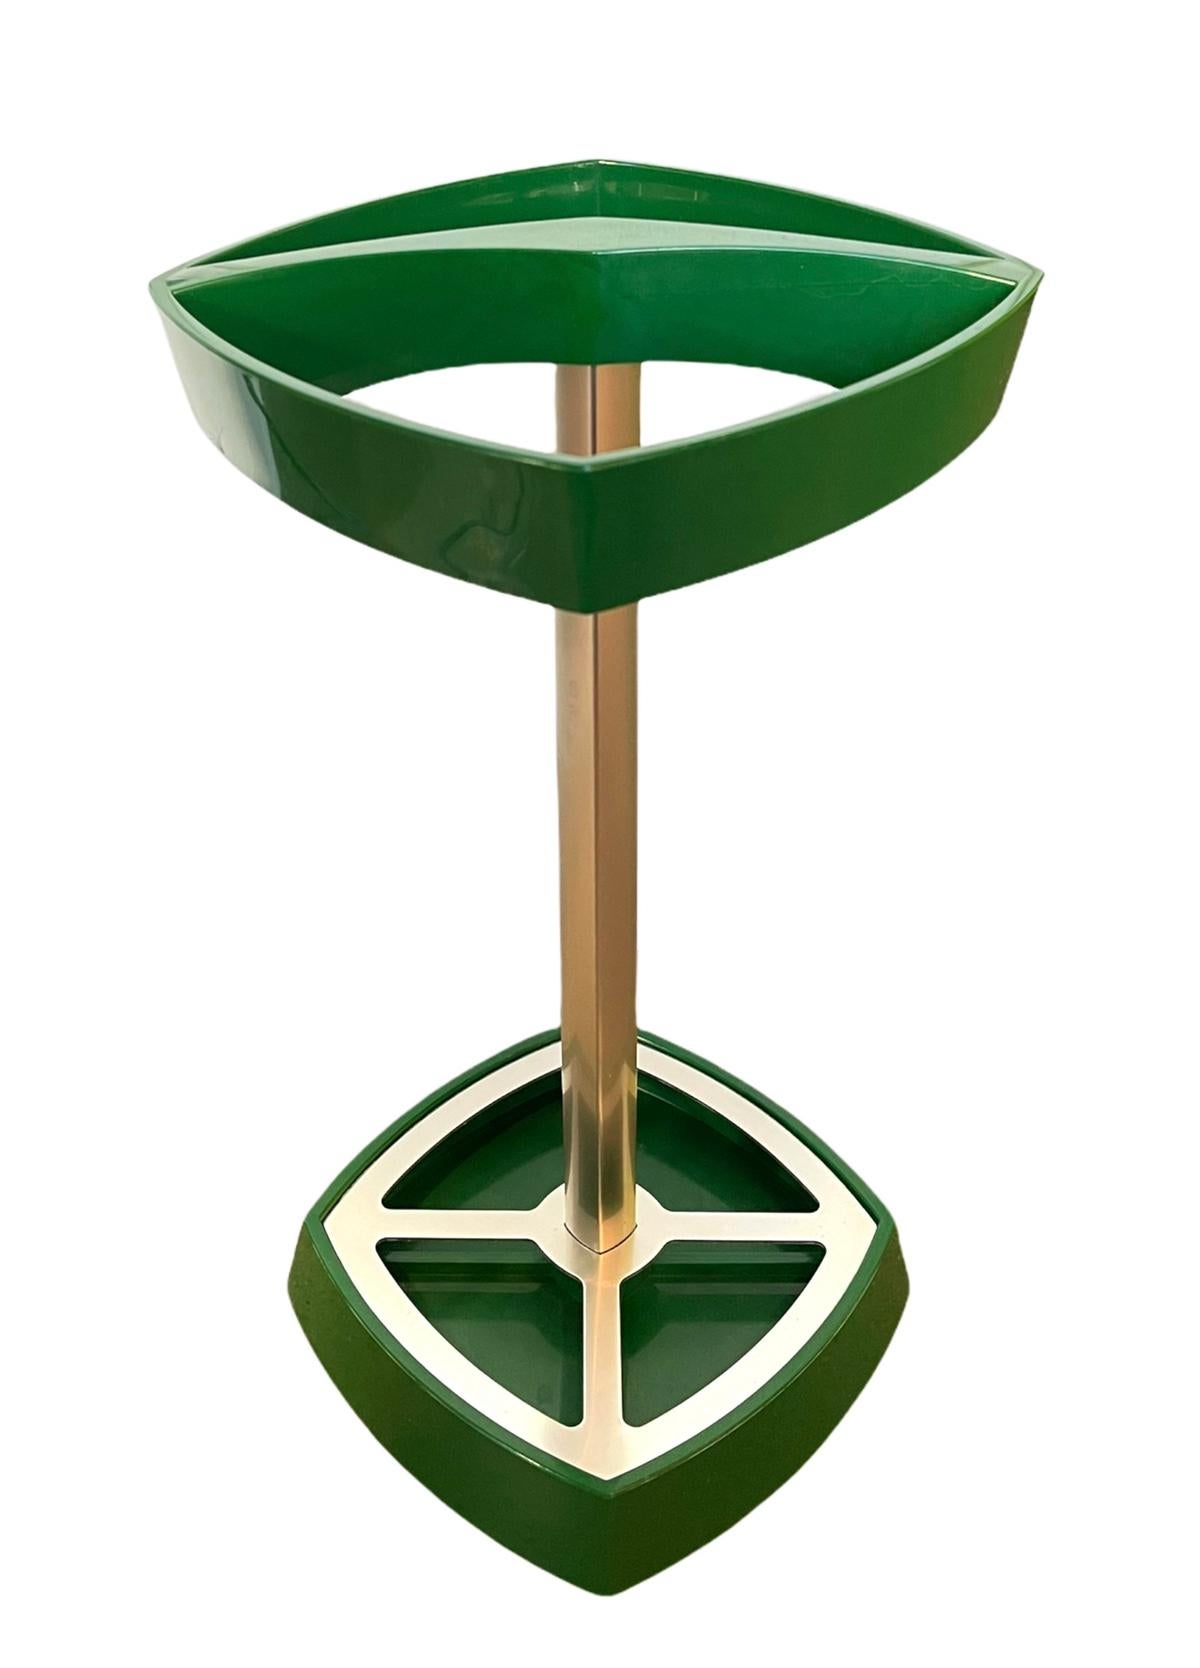 Space Age Umbrella Stand In Good Condition For Sale In Bastrop, TX